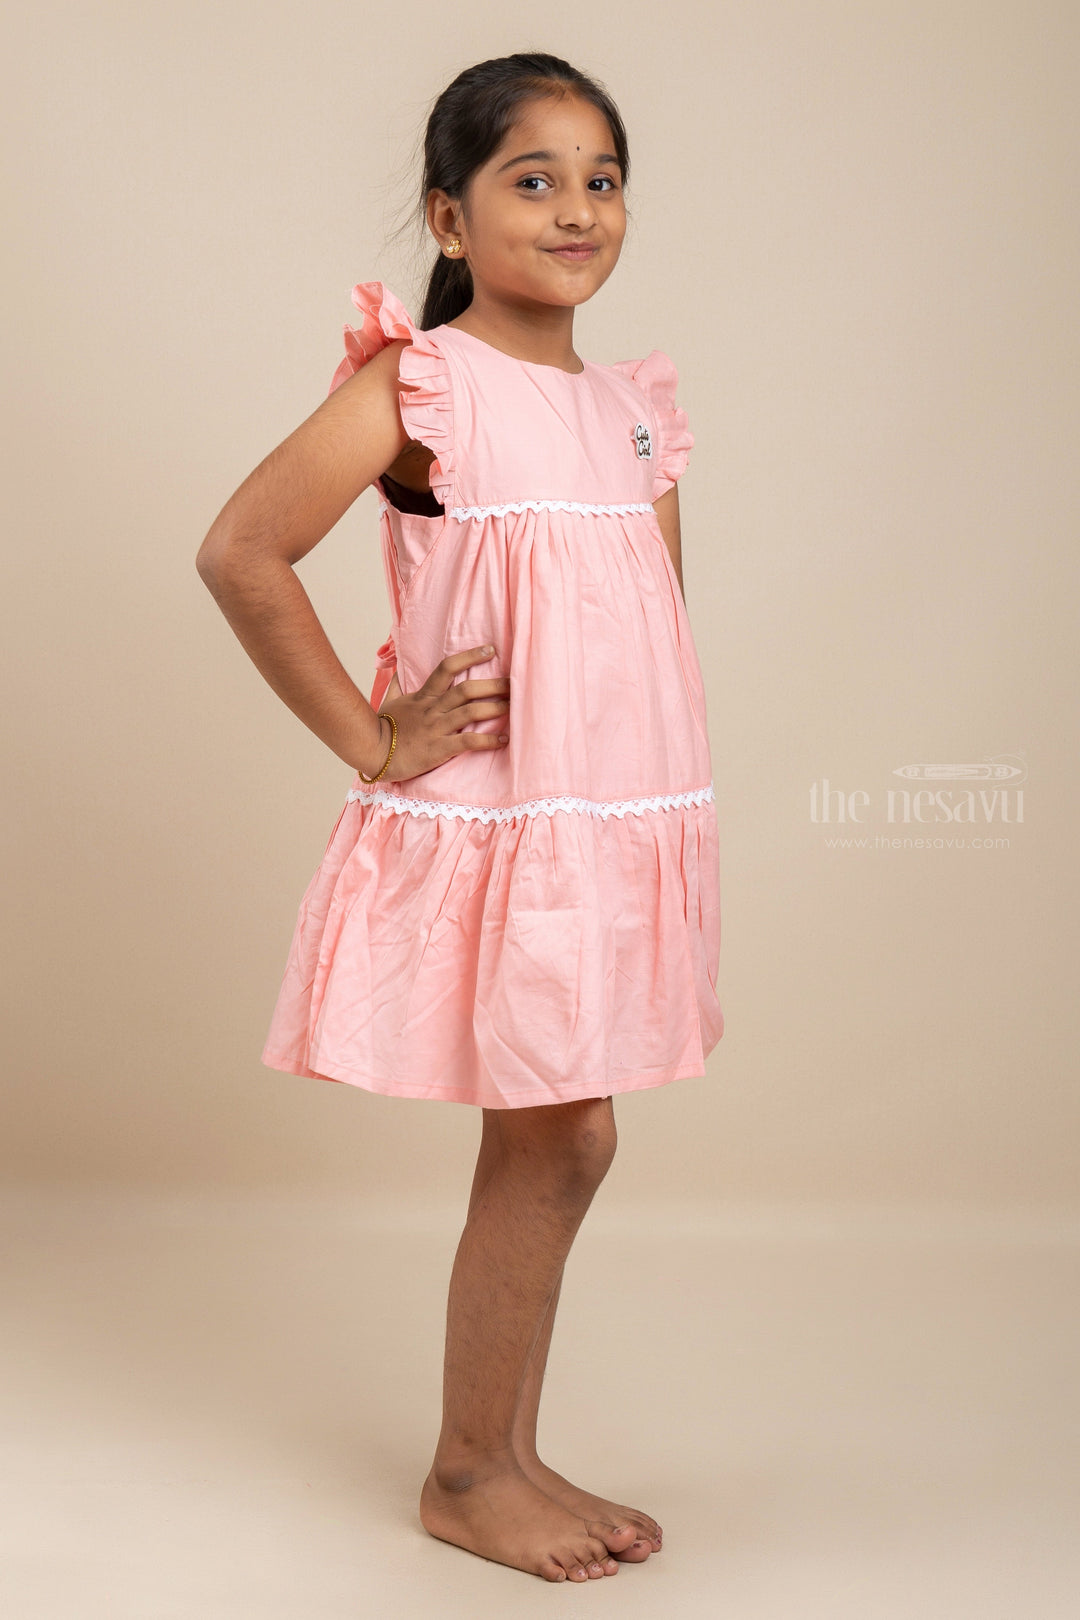 The Nesavu Girls Cotton Frock Blossom Pink - Cottony Cute Frocks With Lace Designs For Little Girls Nesavu Pink Frock Dress| Fashion Frock For Girls| The Nesavu